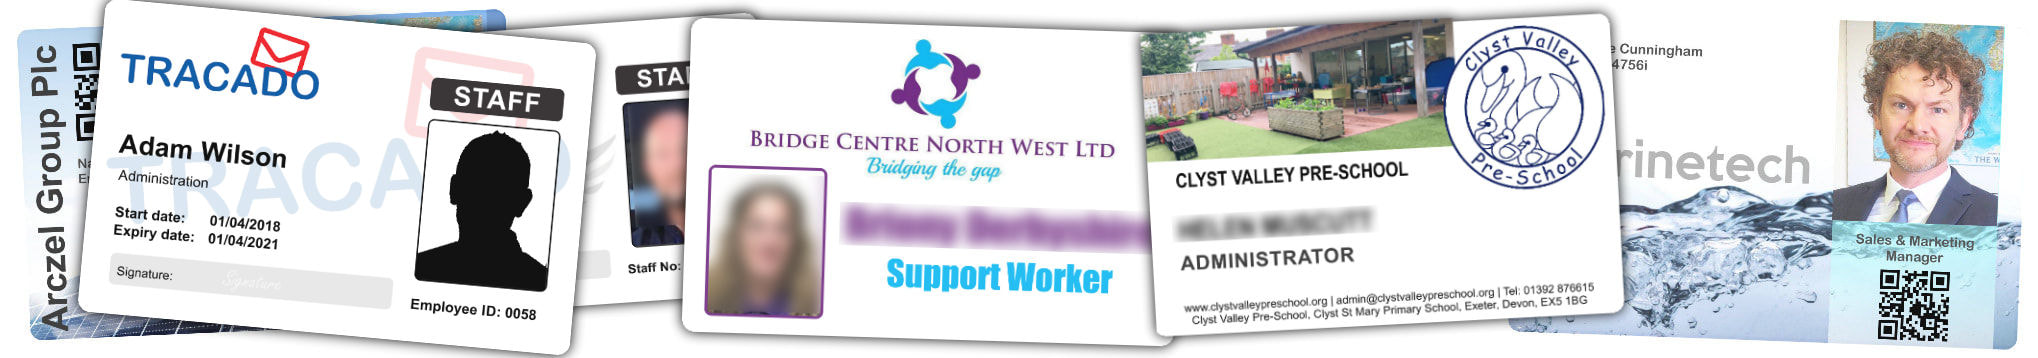 Huddersfield examples of staff photo ID cards | samples of employee Identity card printing | Workers ID cards printed in 